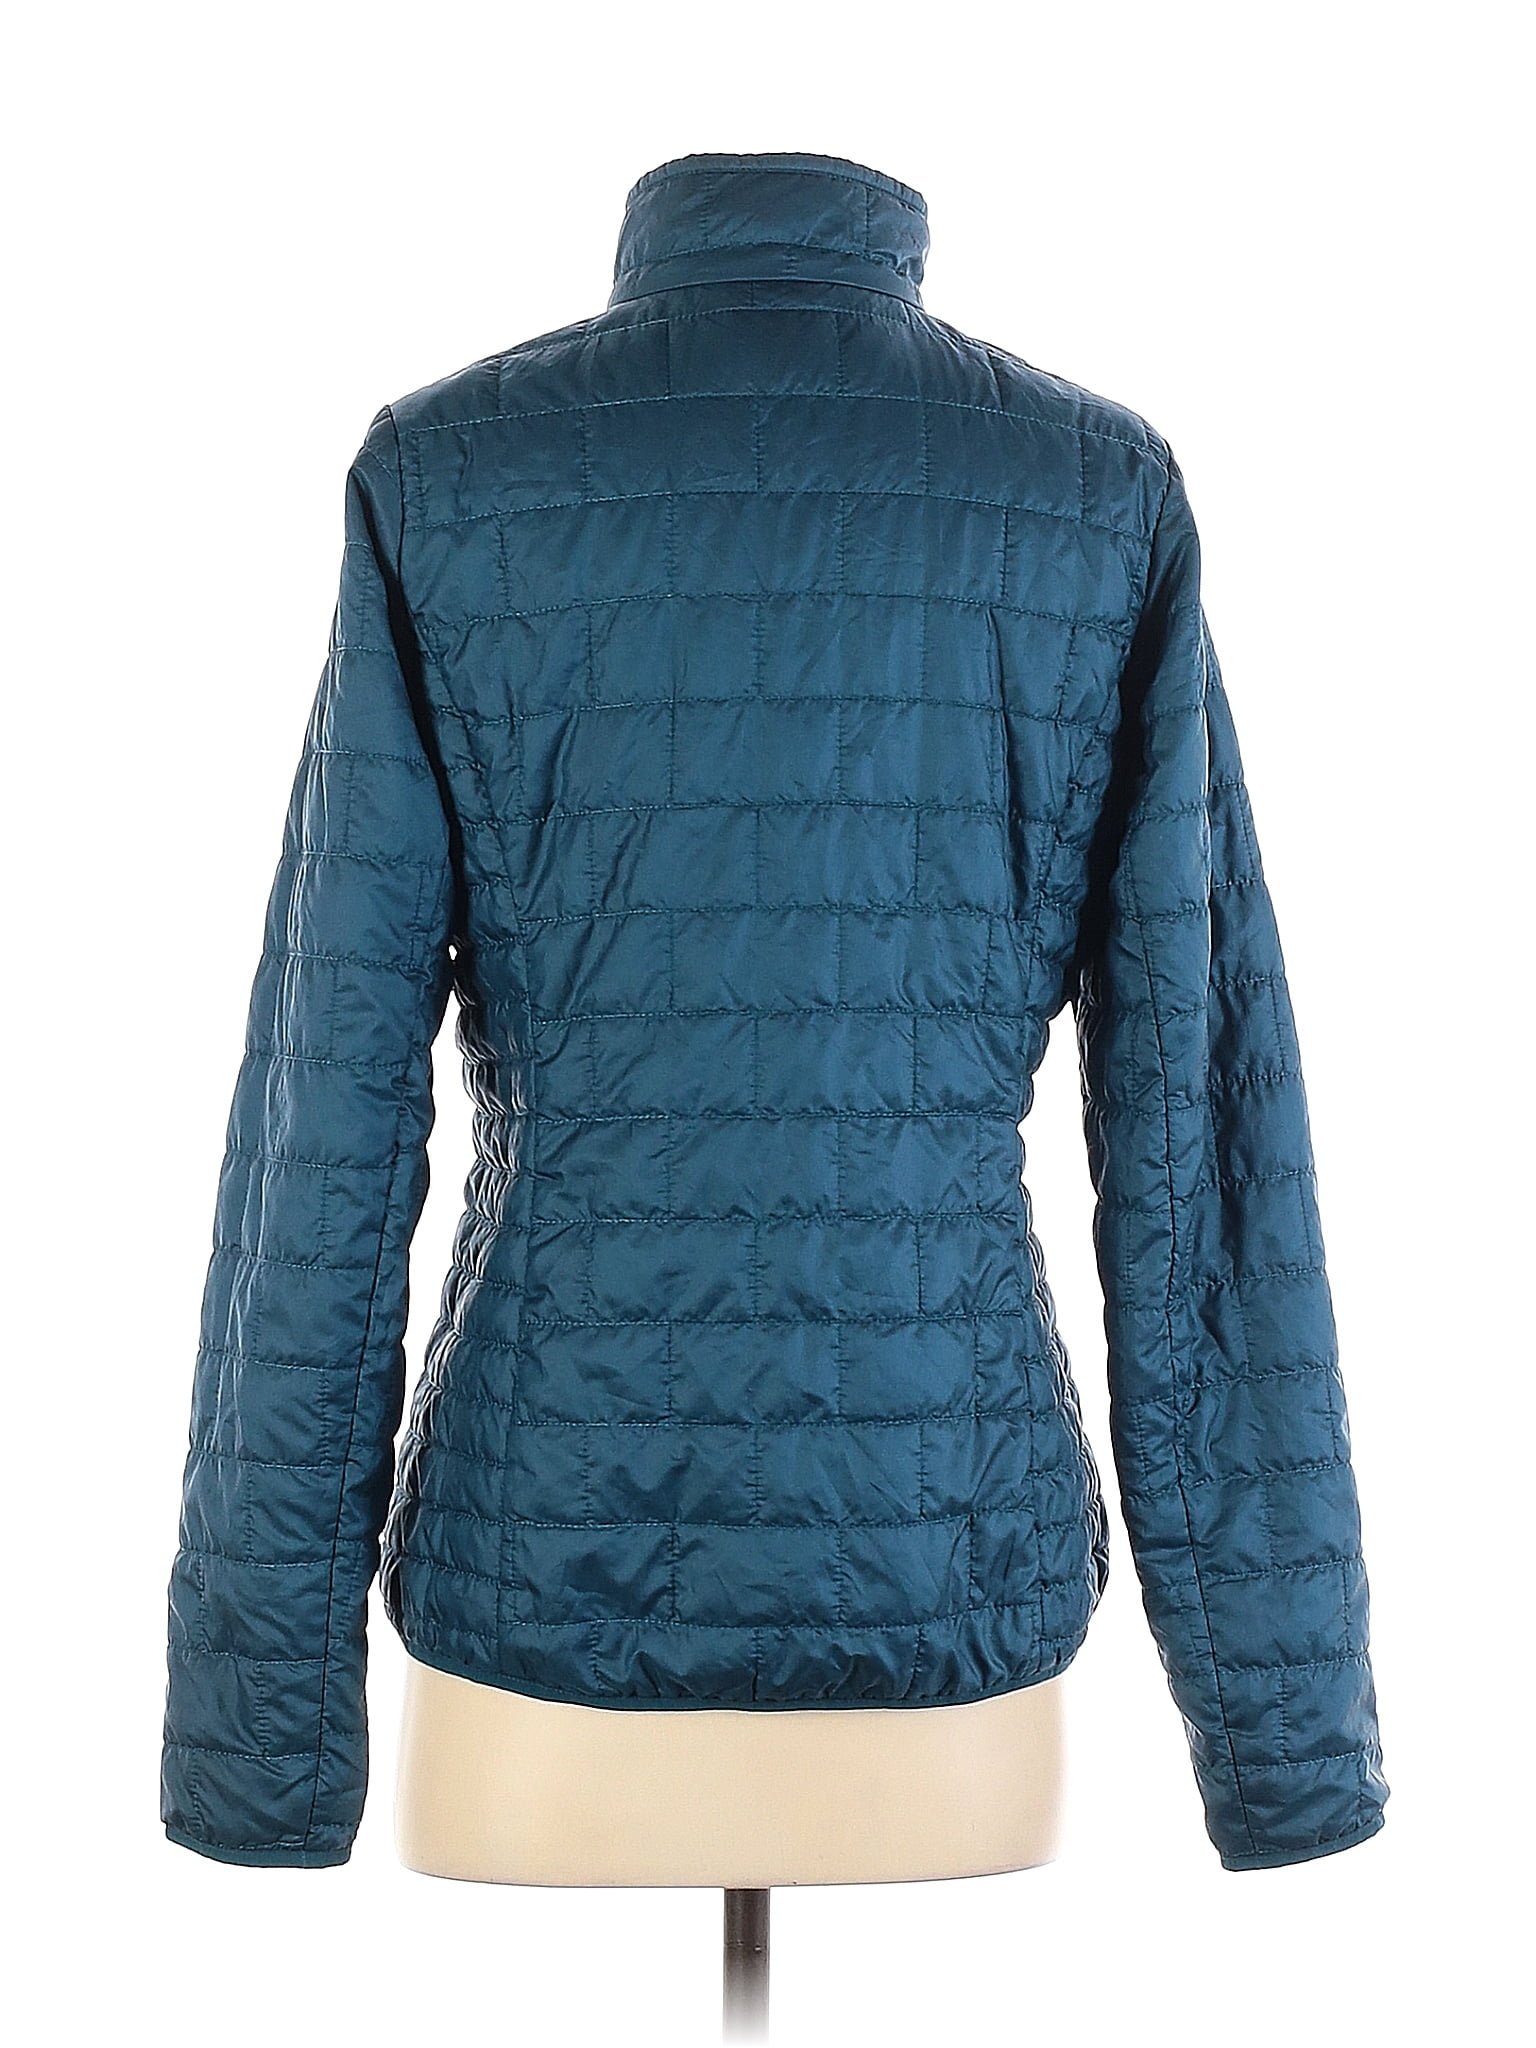 Patagonia 100% Polyester Solid Teal Jacket Size S - 28% off